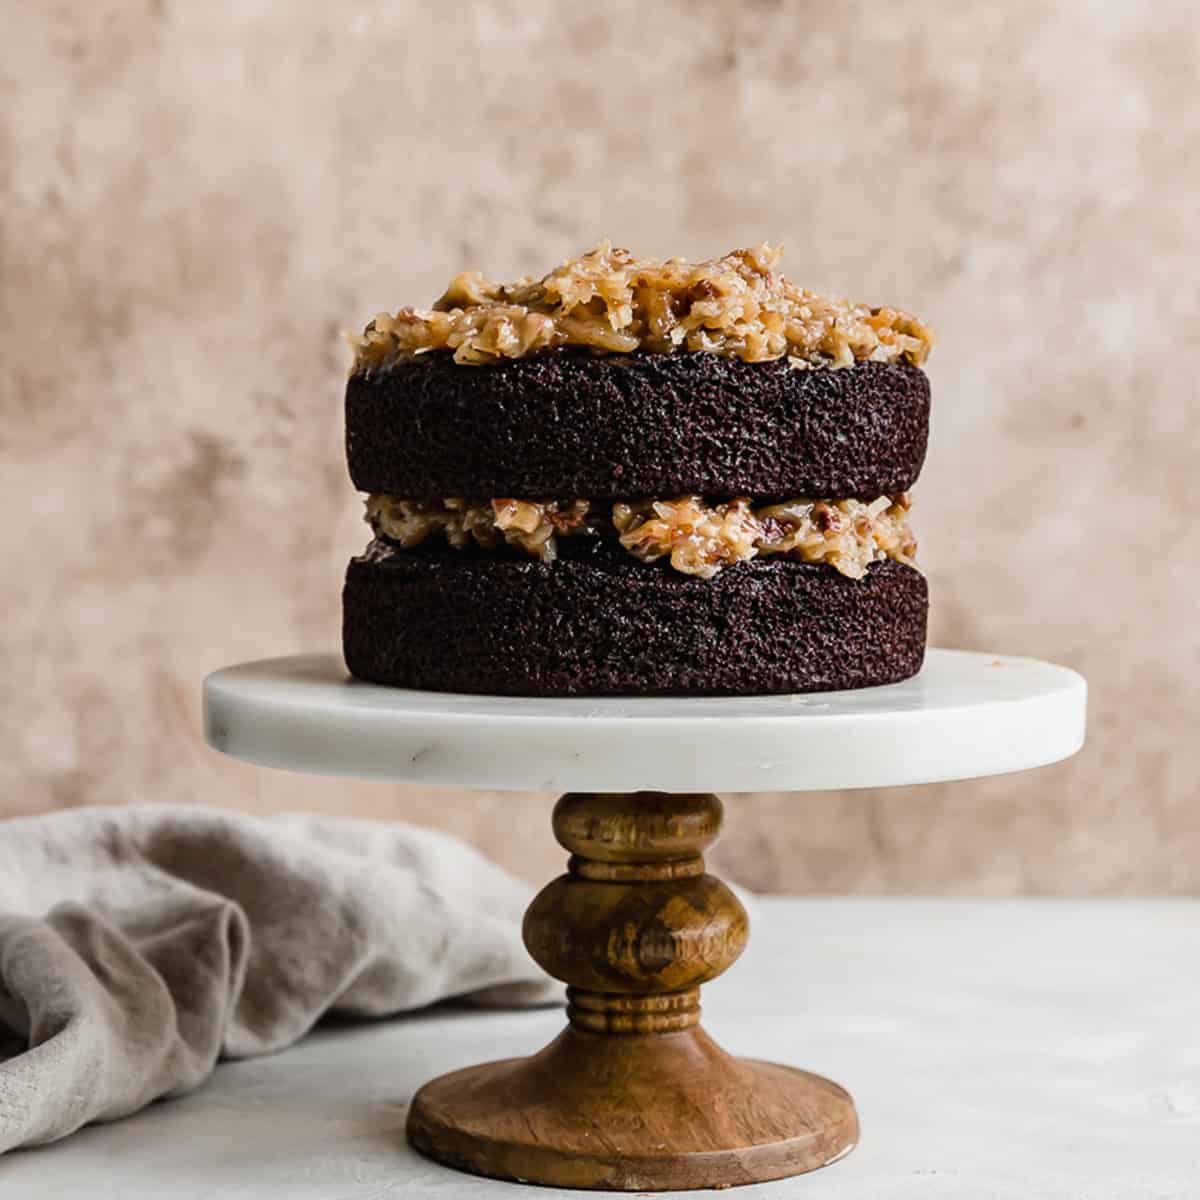 A two layer Small German Chocolate Cake on a white marble cake stand against a light brown background.